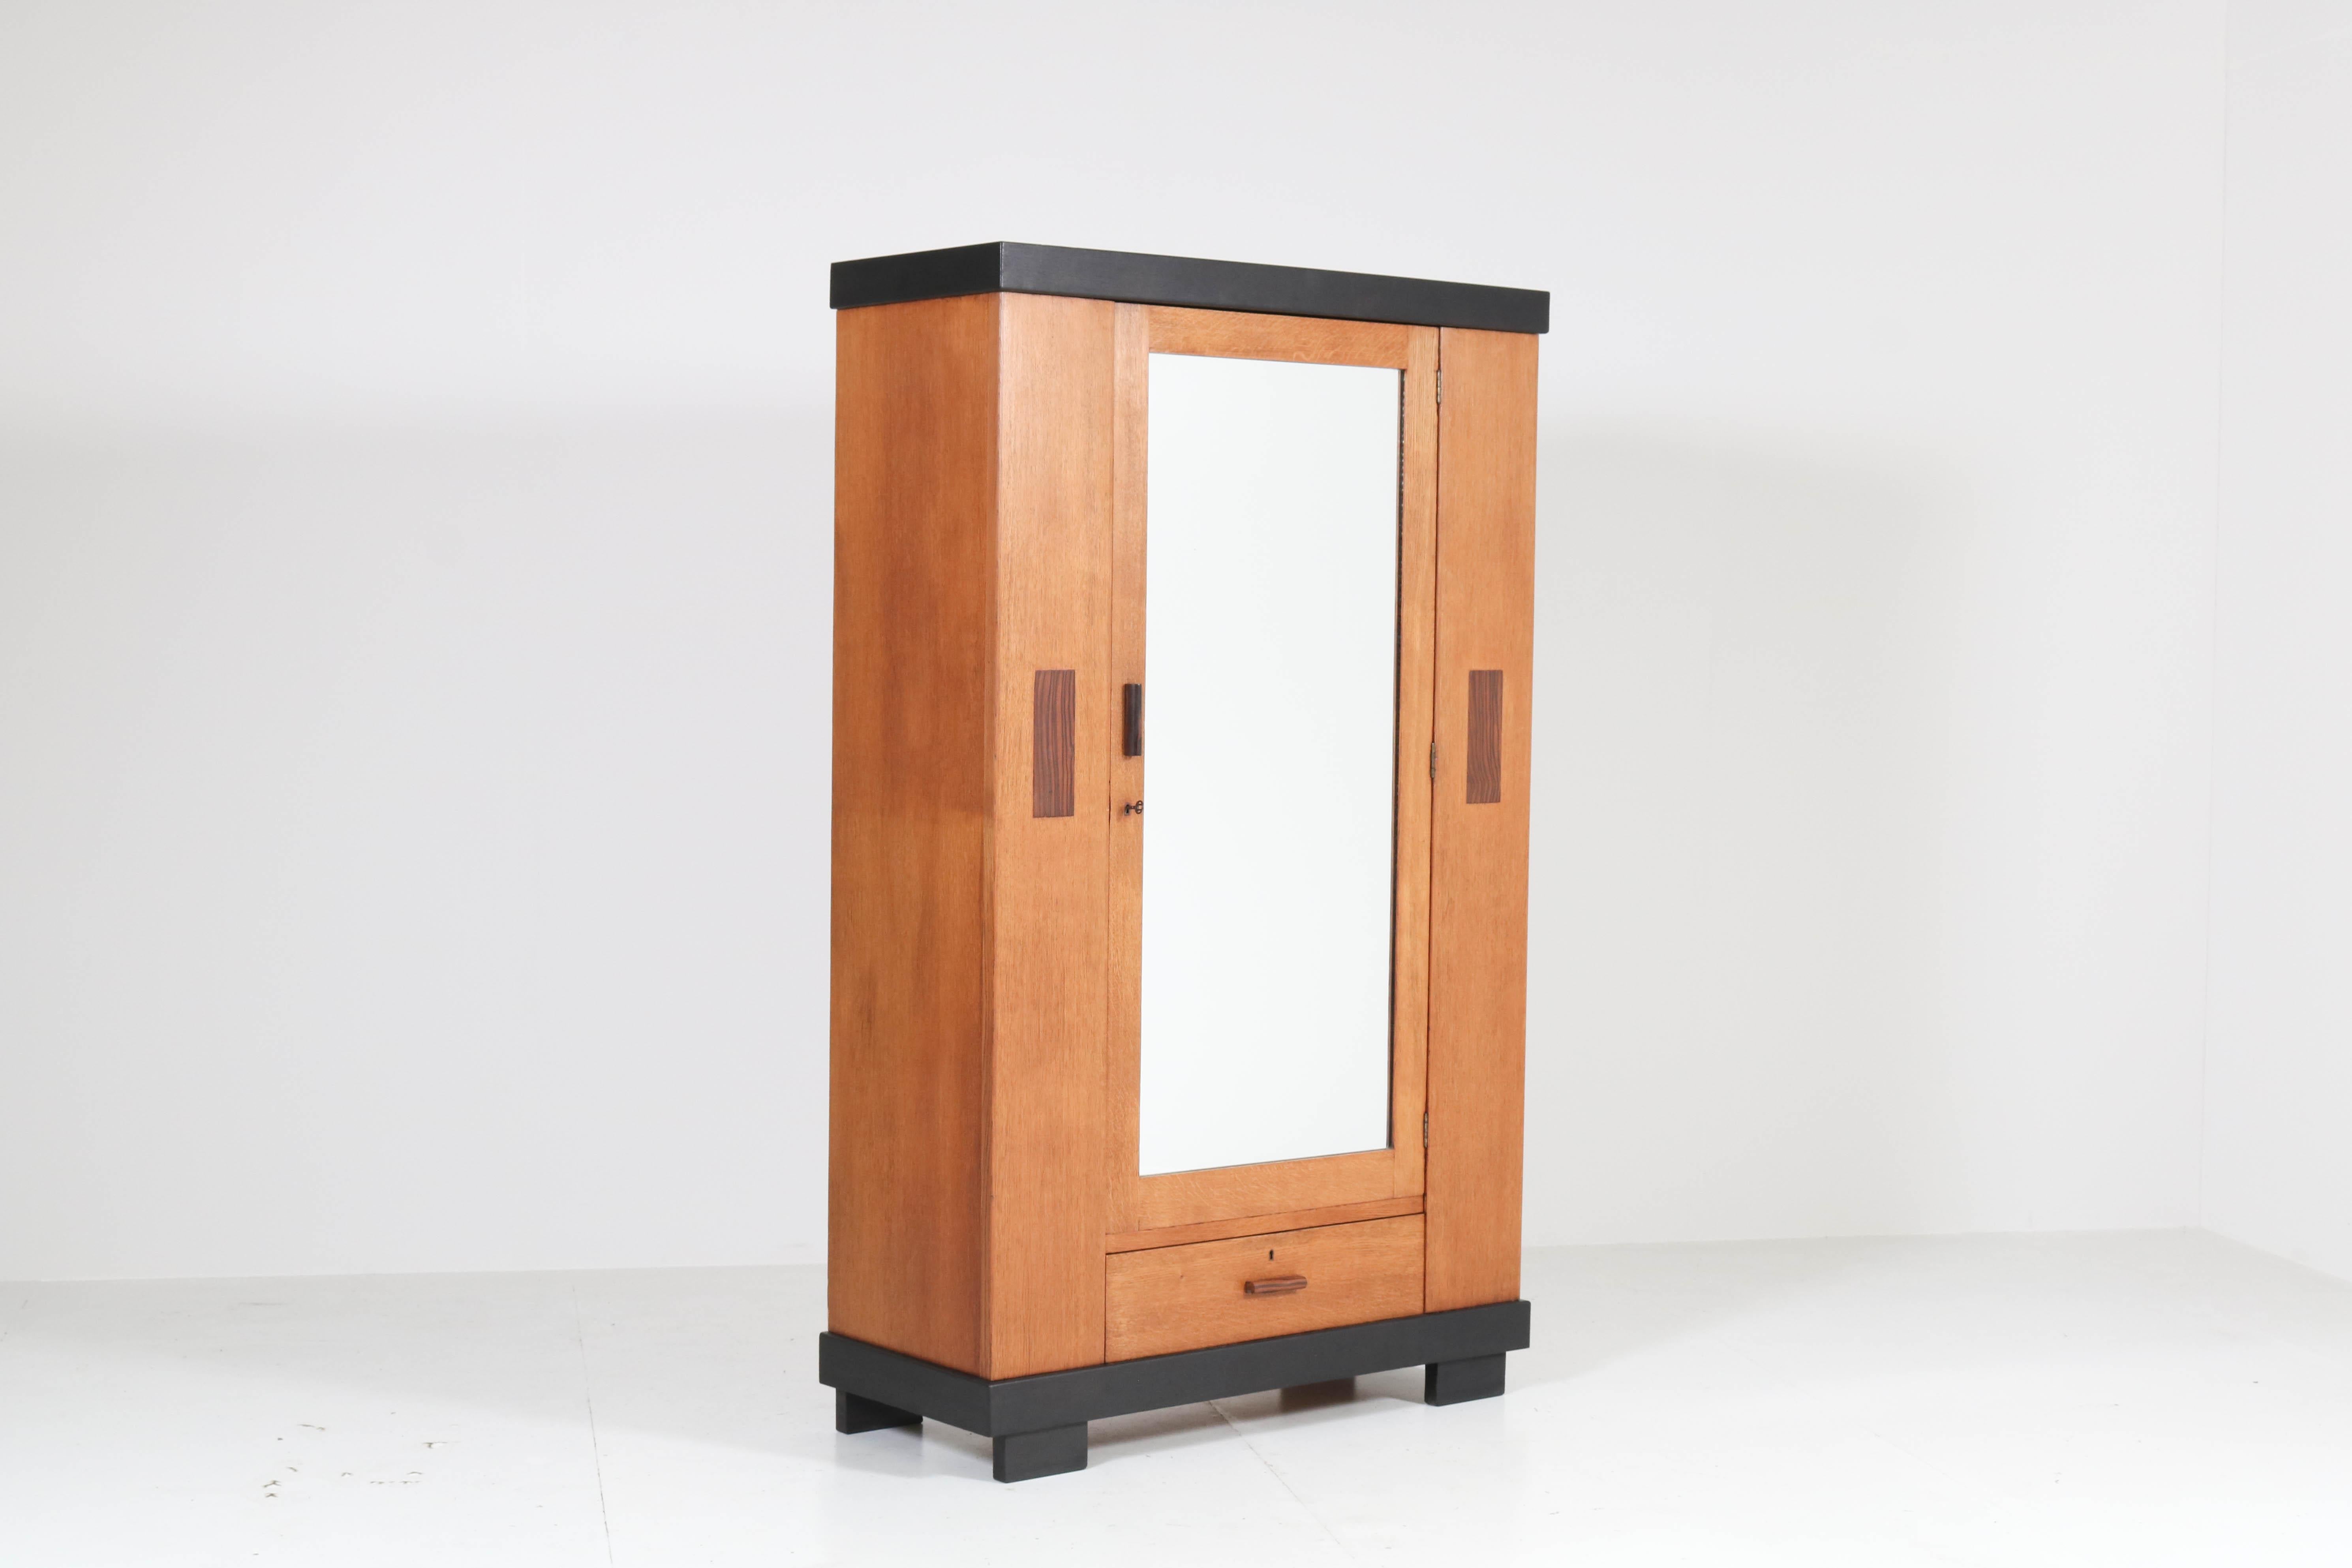 Wonderful and rare Art Deco Haagse School armoir or wardrobe.
Design by Anton Lucas Leiden.
Striking Dutch design from the 1920s.
Solid oak with original oak veneer.
Four original oak shelves.
This armoir can be dismantled for safe